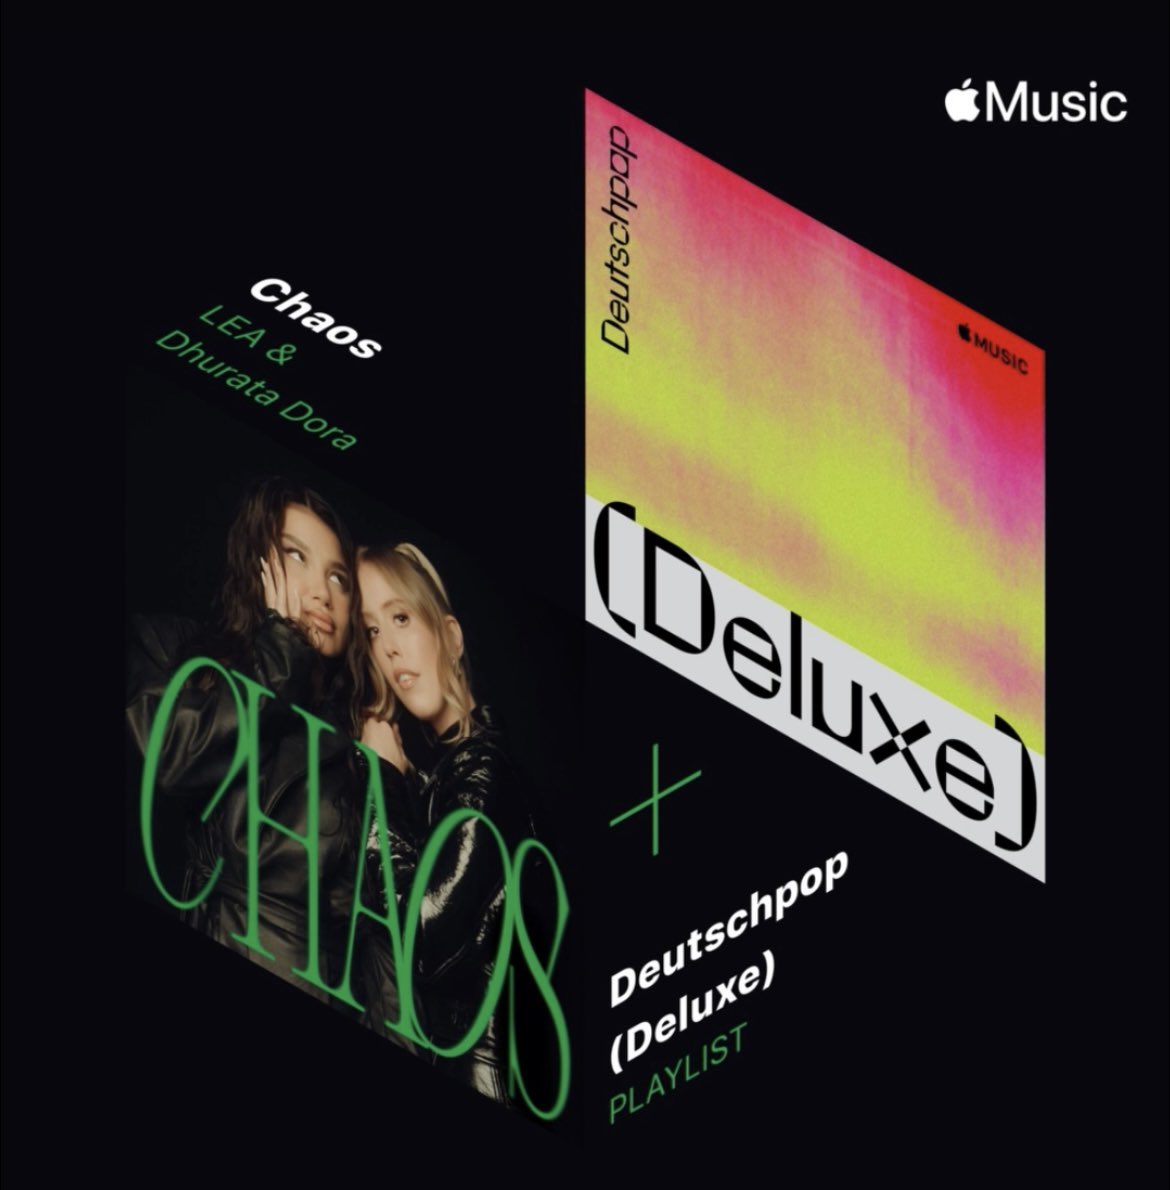 ohh they keep promoting ‘chaos’ now it’s playlisted on deutschpop playlists in both Amazon Music and Apple Music